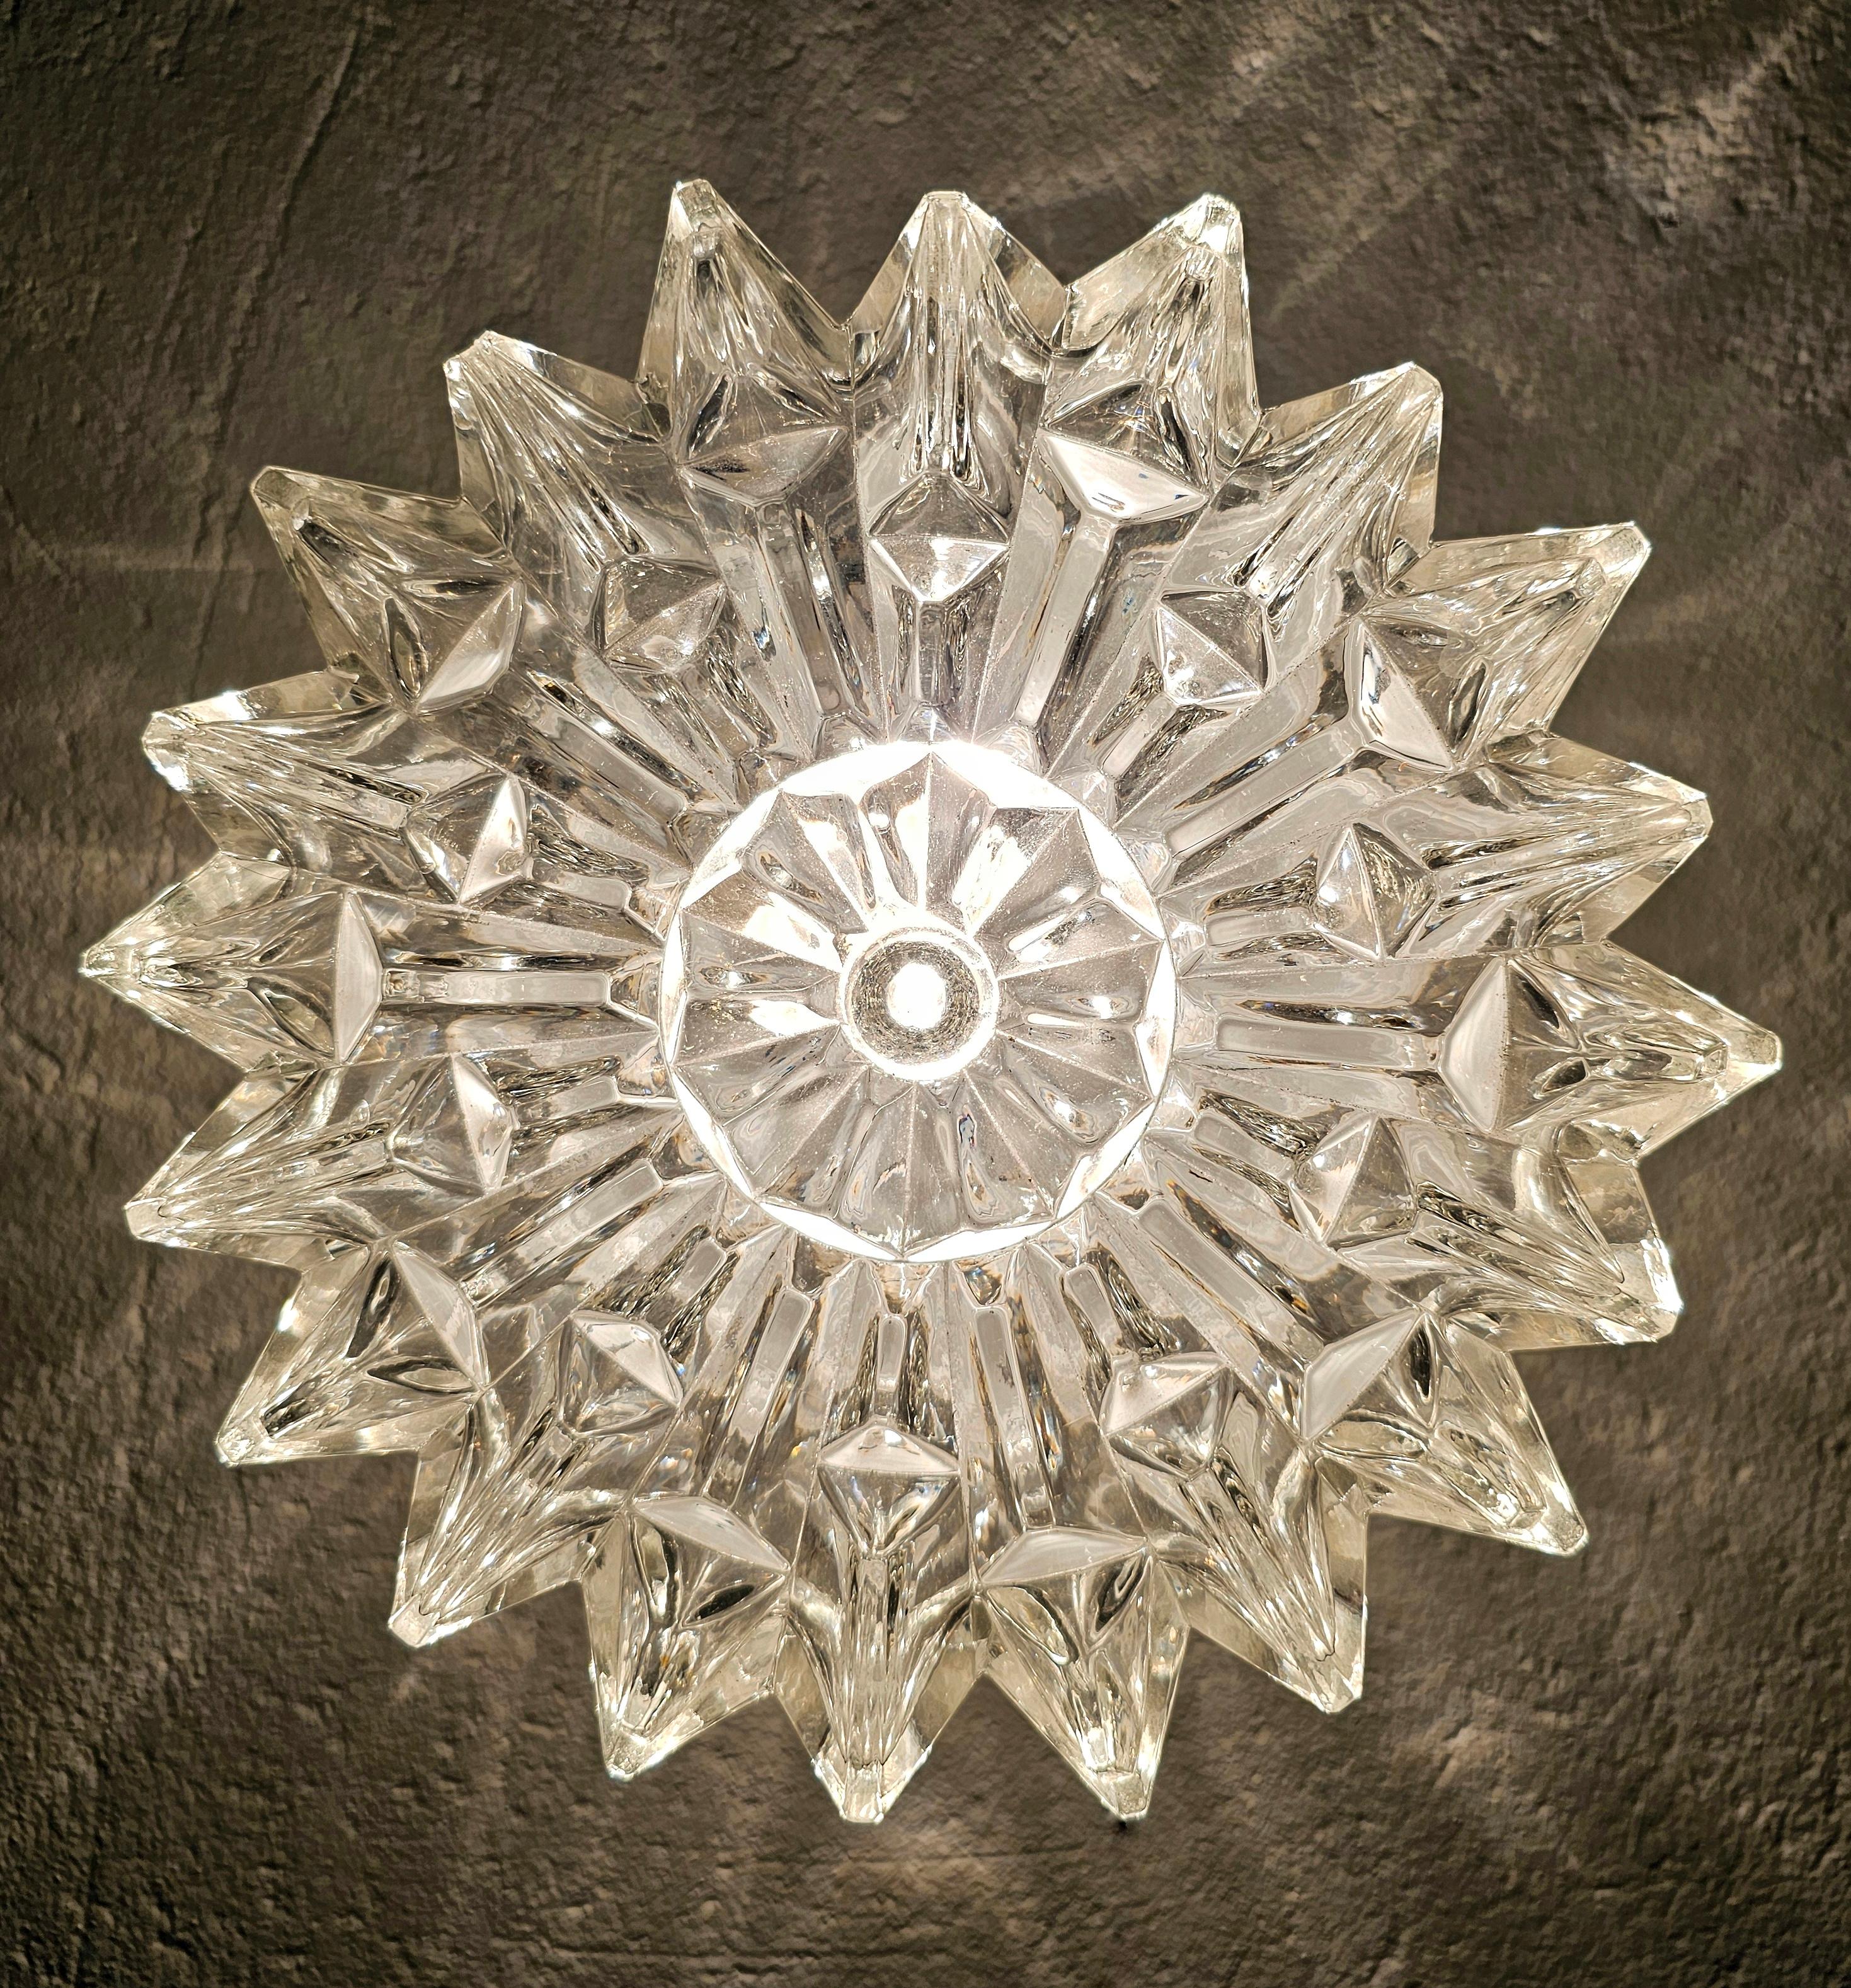 This listing presents a beautiful mid century modern flush mount or sconce shaped as a snowflake, with beautiful edges, which create very attractive light. It is done in thick glass with beautiful icy relief.. This very decorative piece of lighting